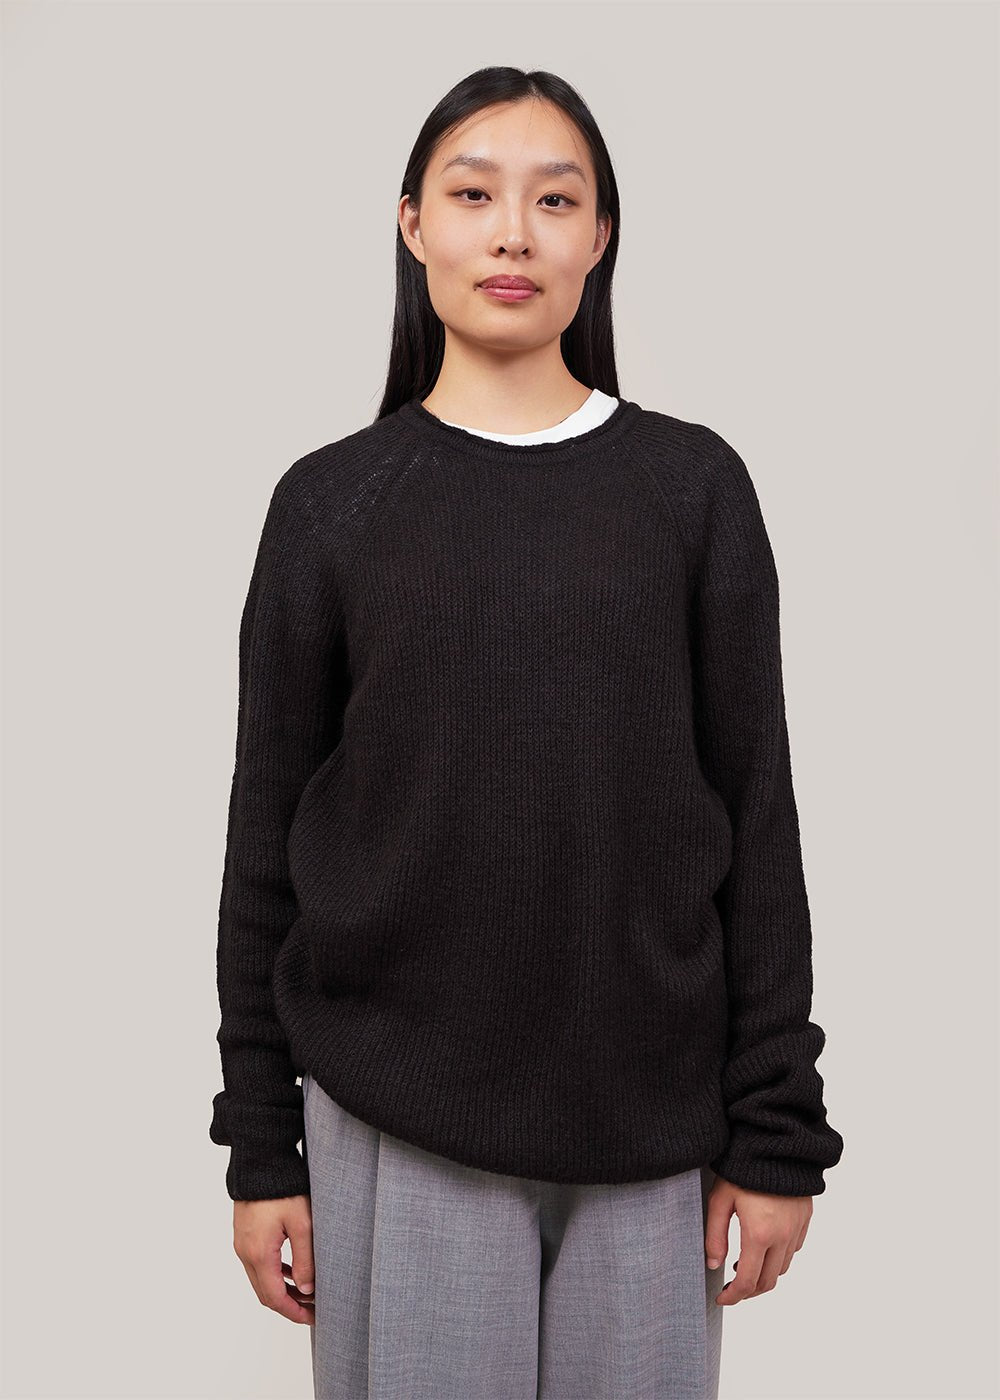 Mijeong Park Black Mohair Blend Crew Neck Sweater - New Classics Studios Sustainable Ethical Fashion Canada